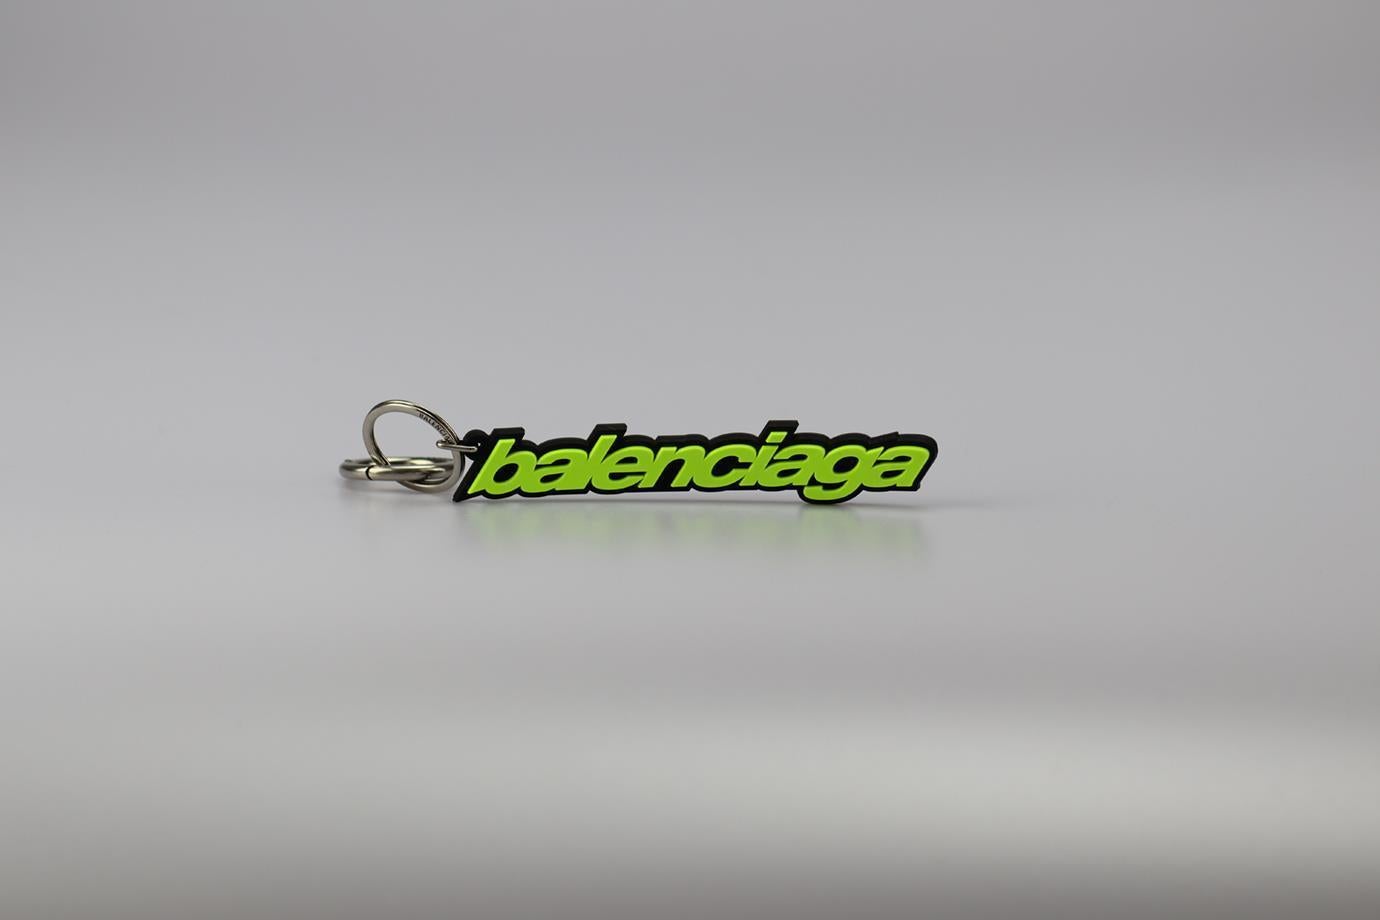 Balenciaga Logo Detailed Rubber Keychain. Neon-green and black. Buckle fastening - Back. Does not come with - dustbag or box. Height: 0.7 In. Width: 5.7 In. Depth: 0.2 In. Condition: Used. Very good condition - No sign of wear; see pictures